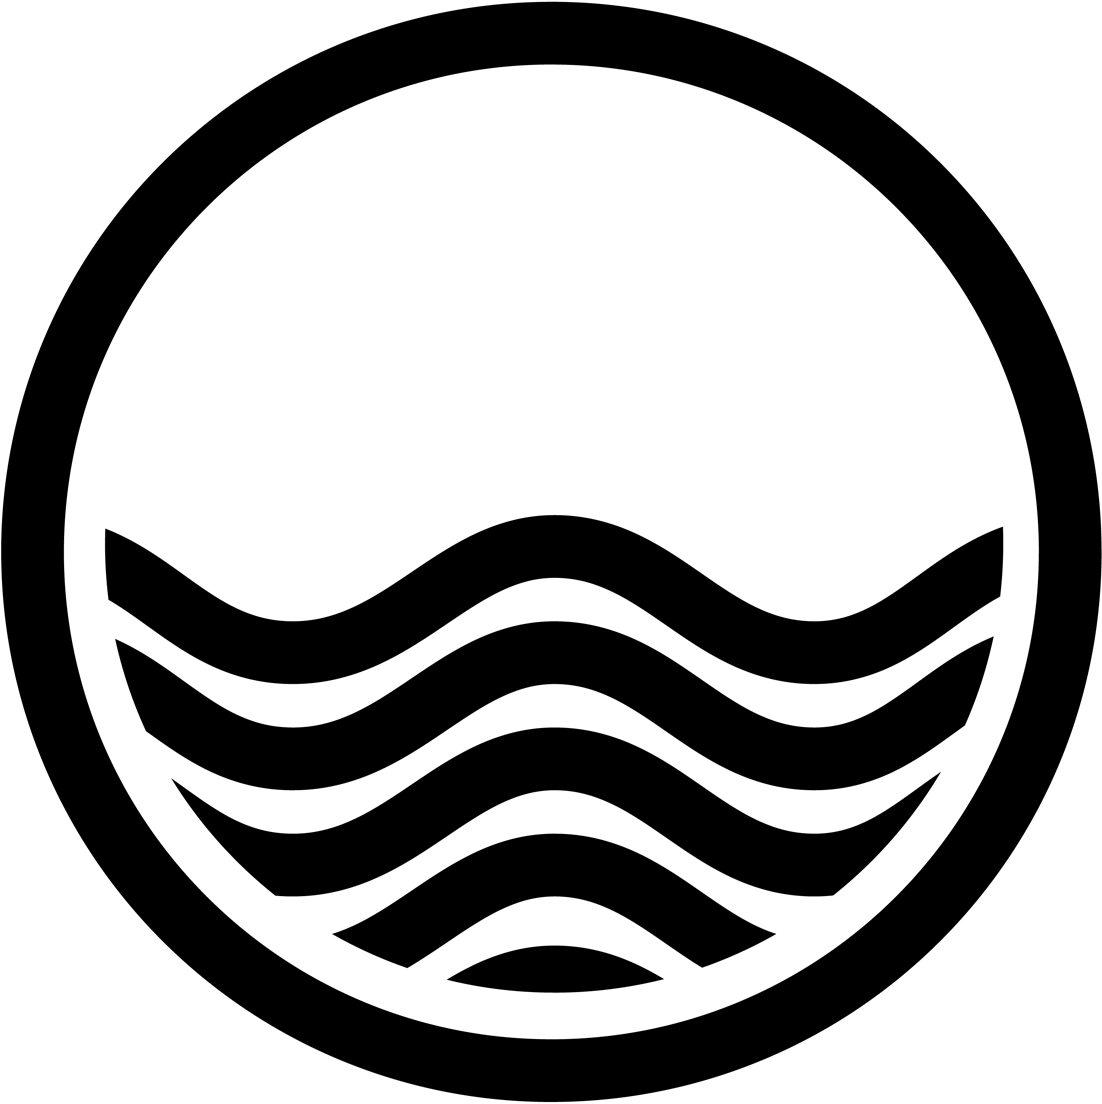 Water Waves Clip Art - Cliparts.co